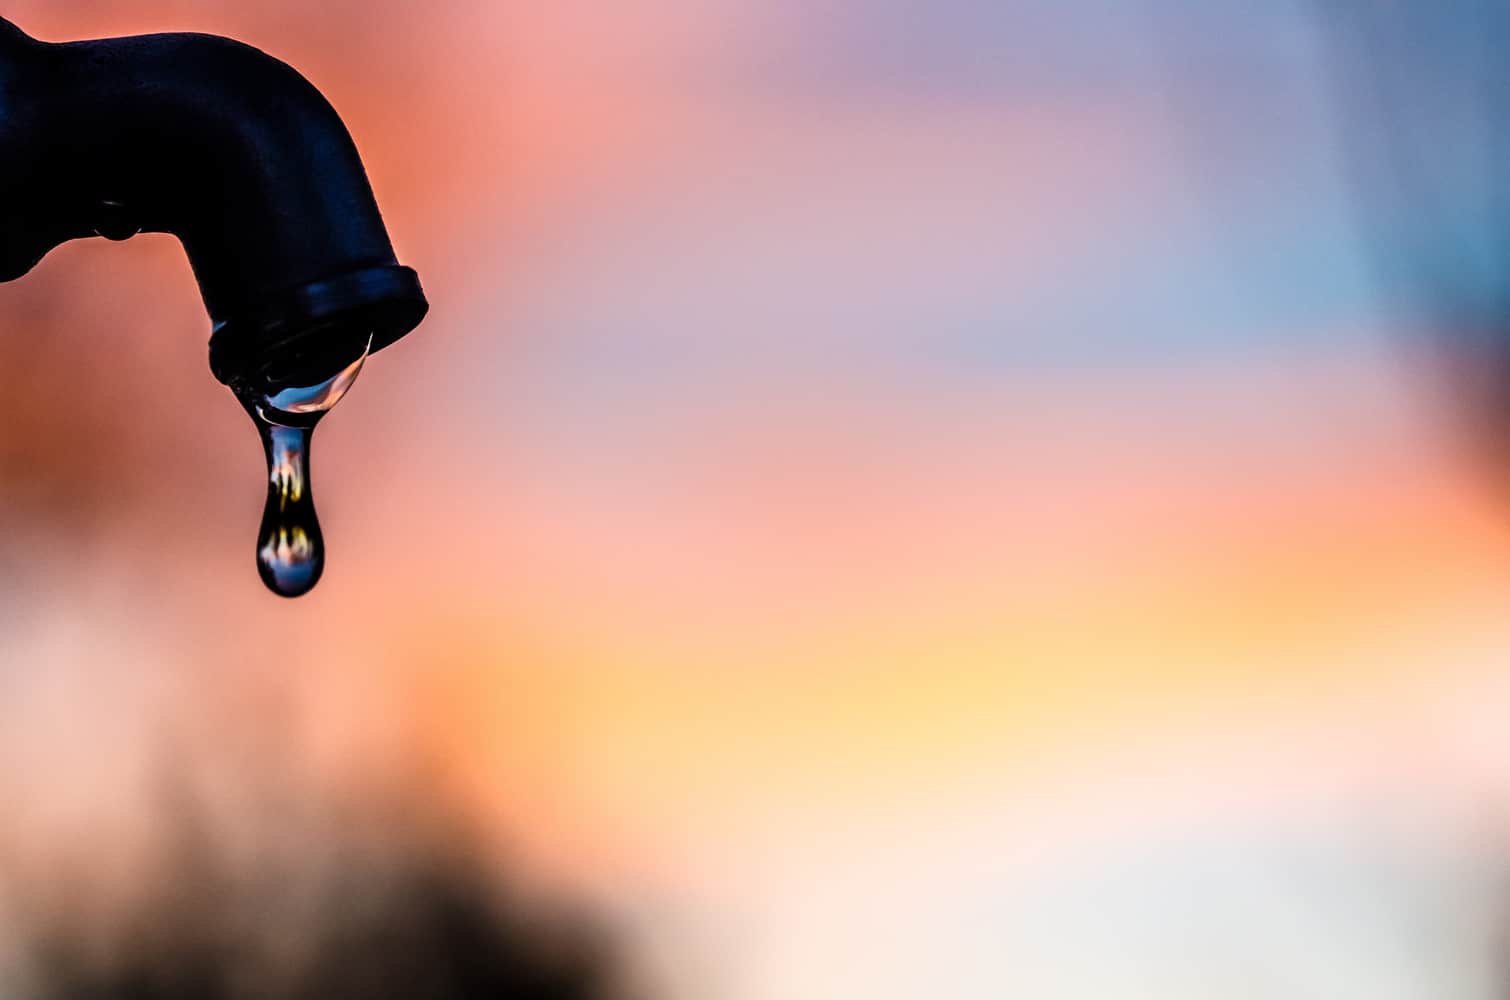 Gauteng affected by massive water outage, thanks to Eskom - The Citizen